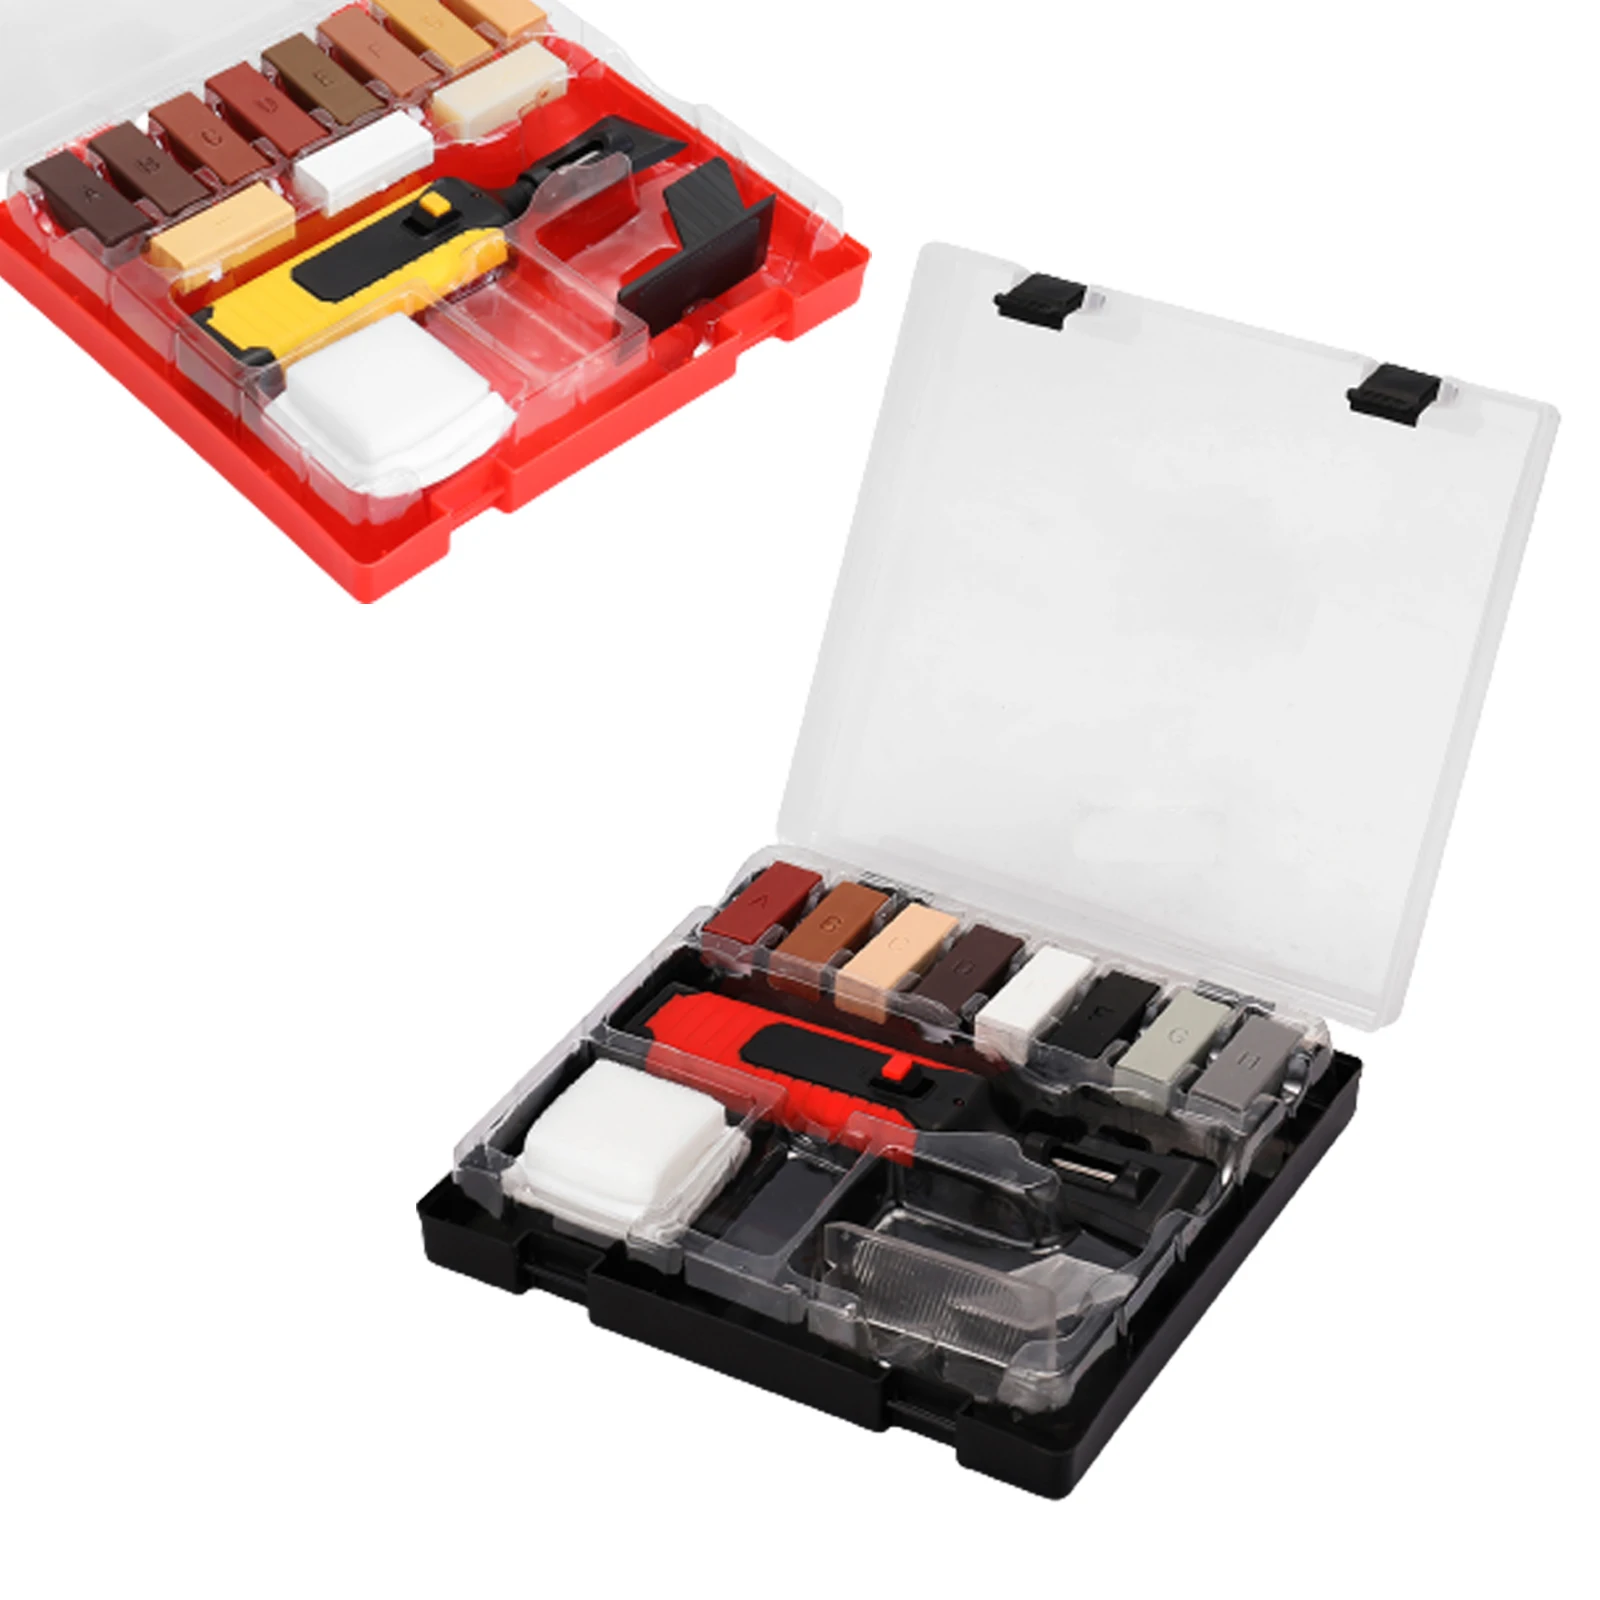 Laminate Repairing Kit Wax System Ch Floor Max 66% OFF Sturdy Casing Worktop Free Shipping New